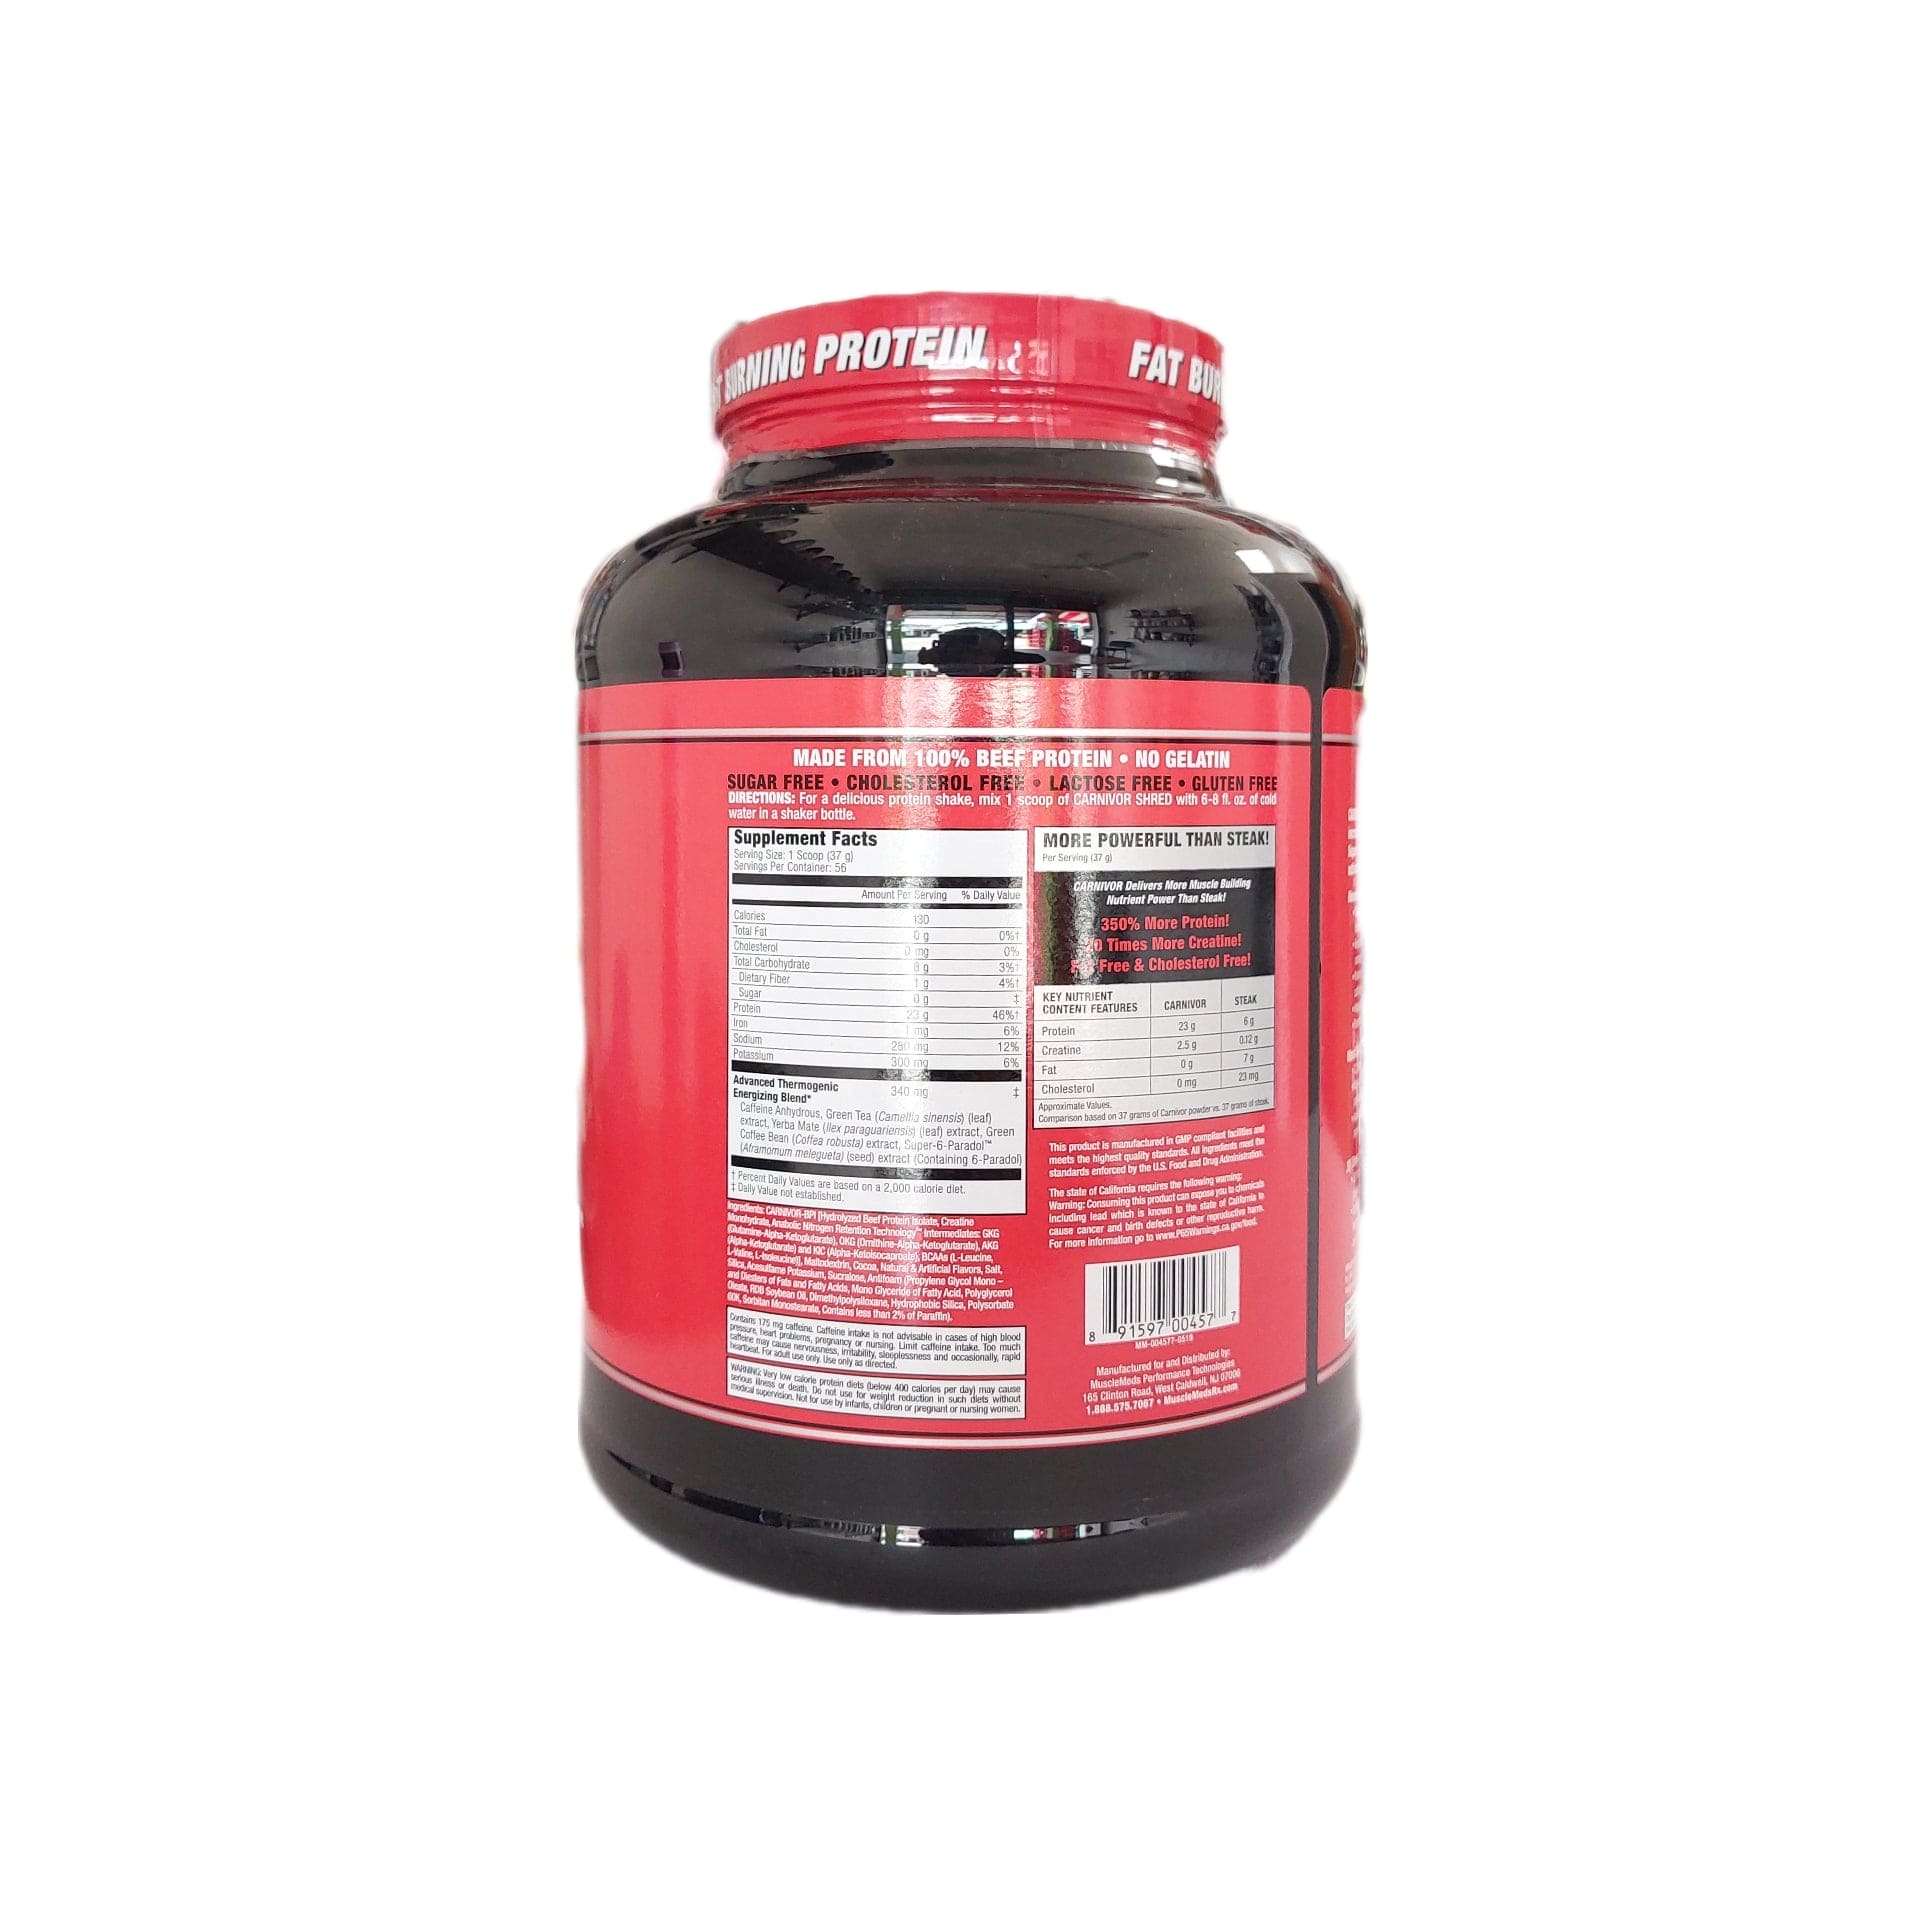 Proteina Musclemeds Carnivor Shred 4.56 Lbs - Body Fit Supplements